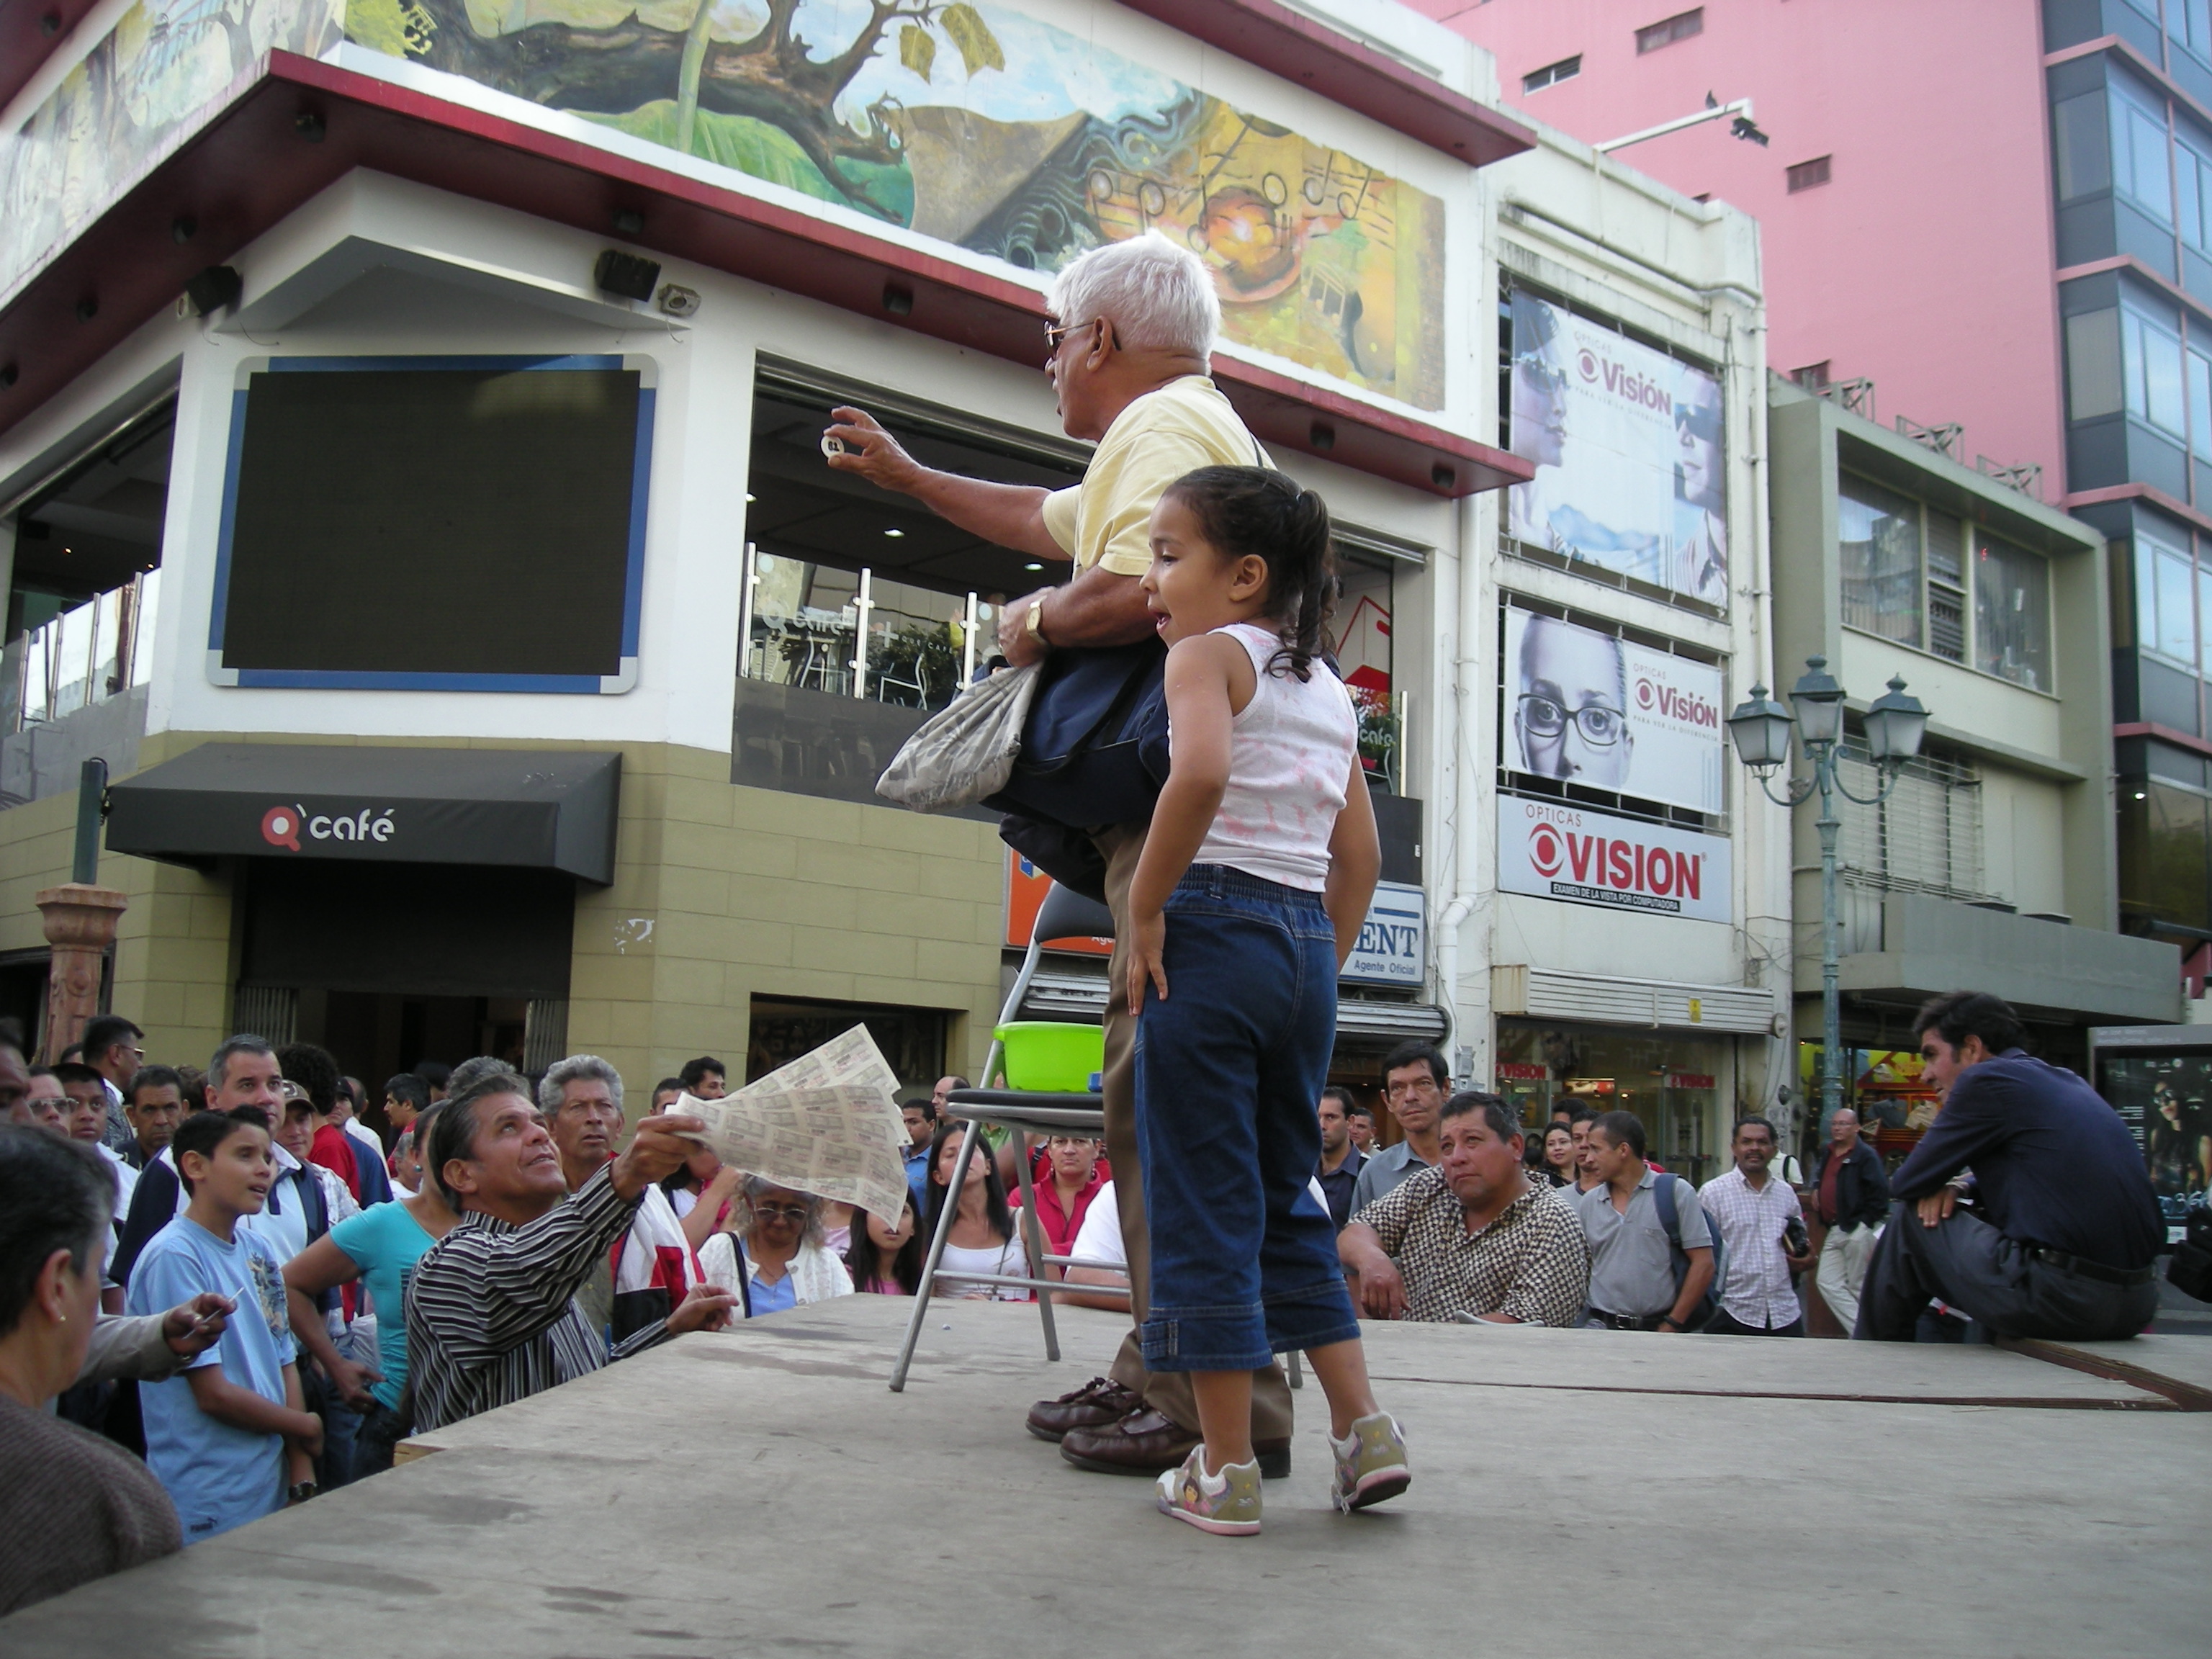 A real time lottery, prizes every 5 minutes, in San Jose, Costa Rica.